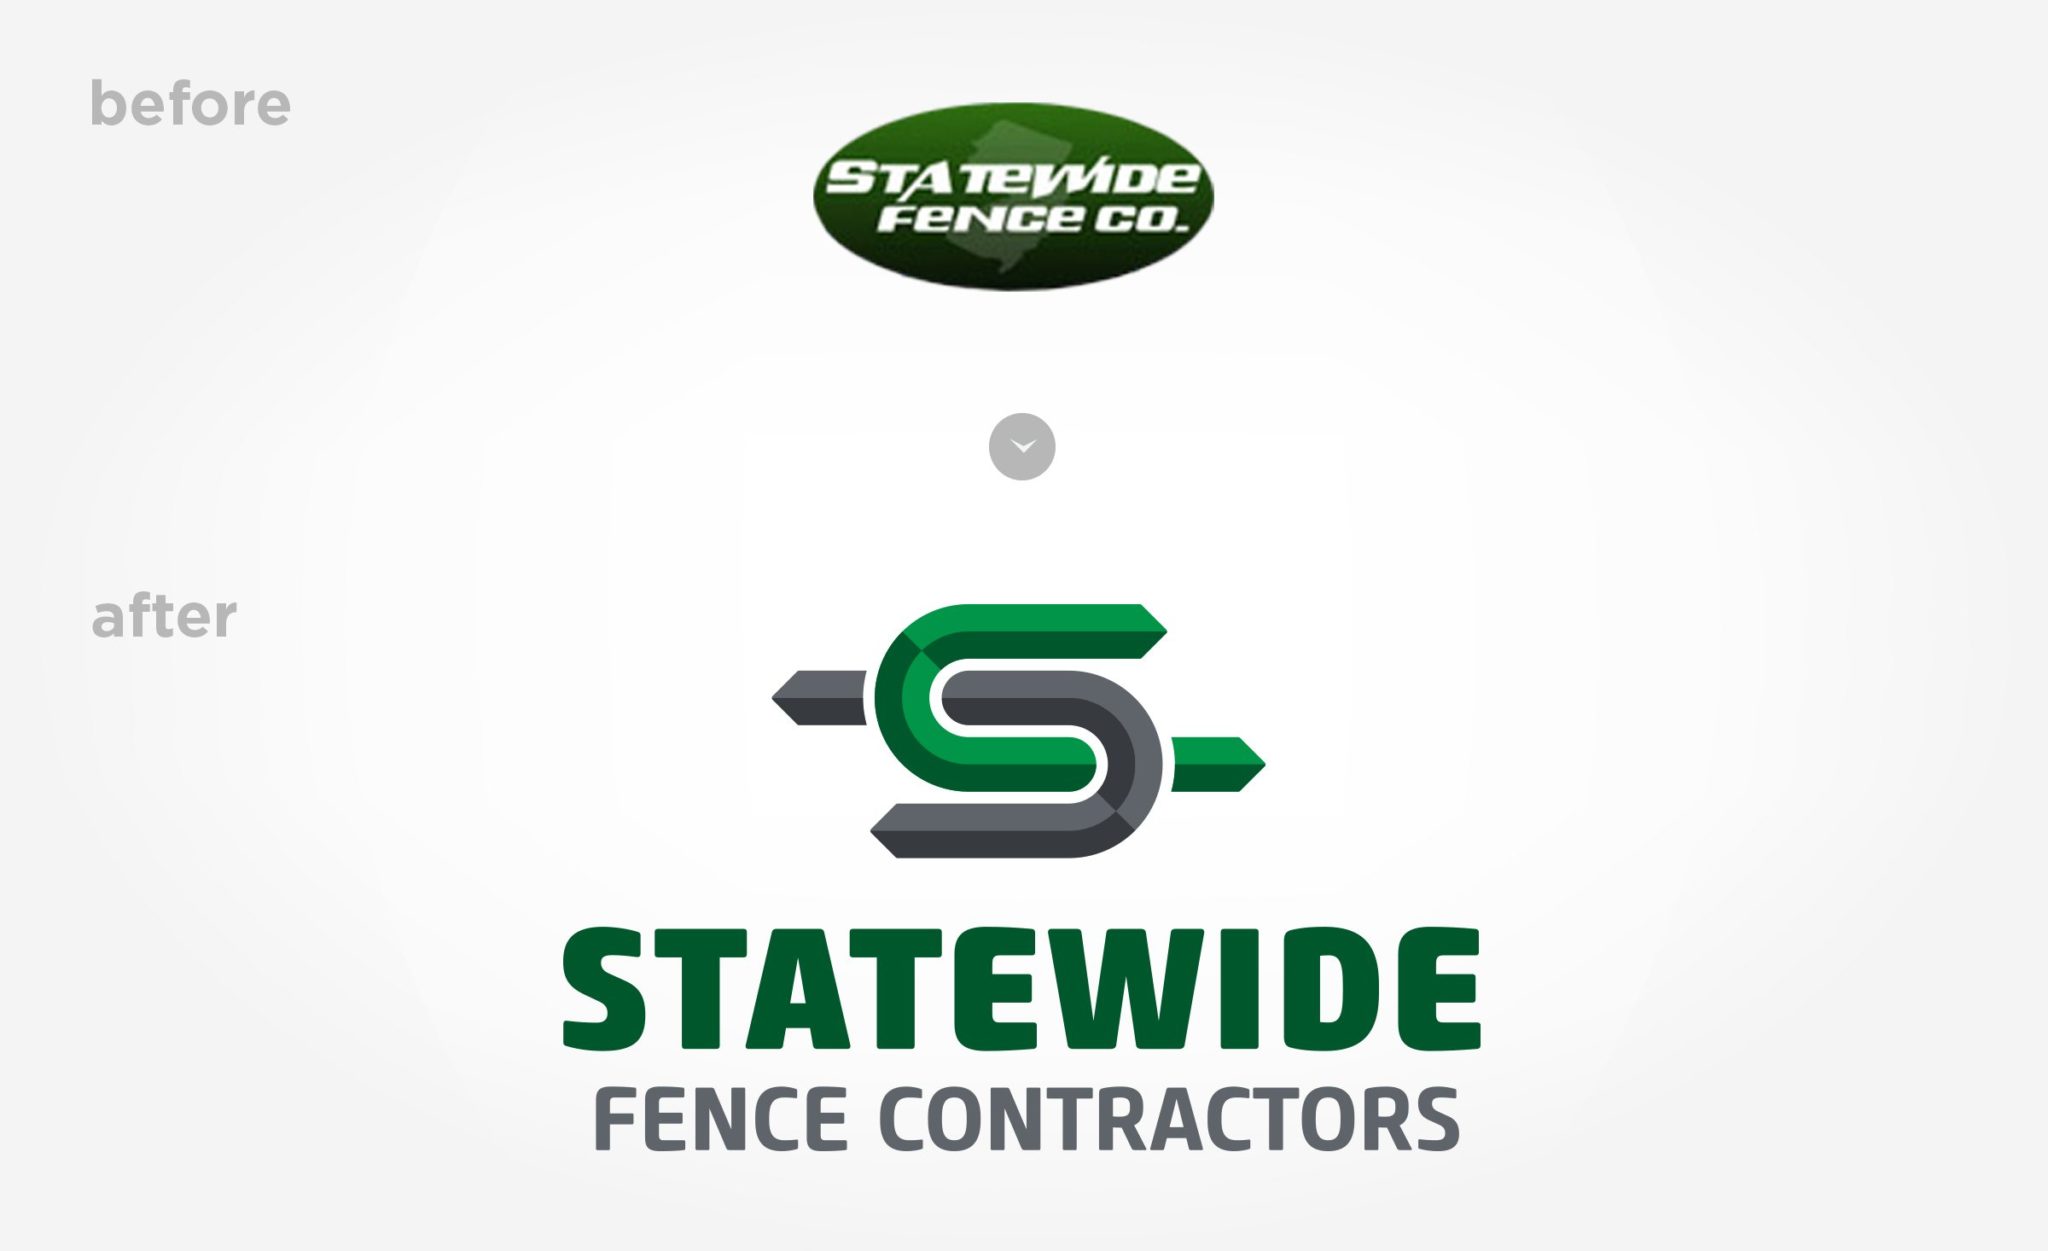 Before & after logo design for Statewide Fence Contractors.